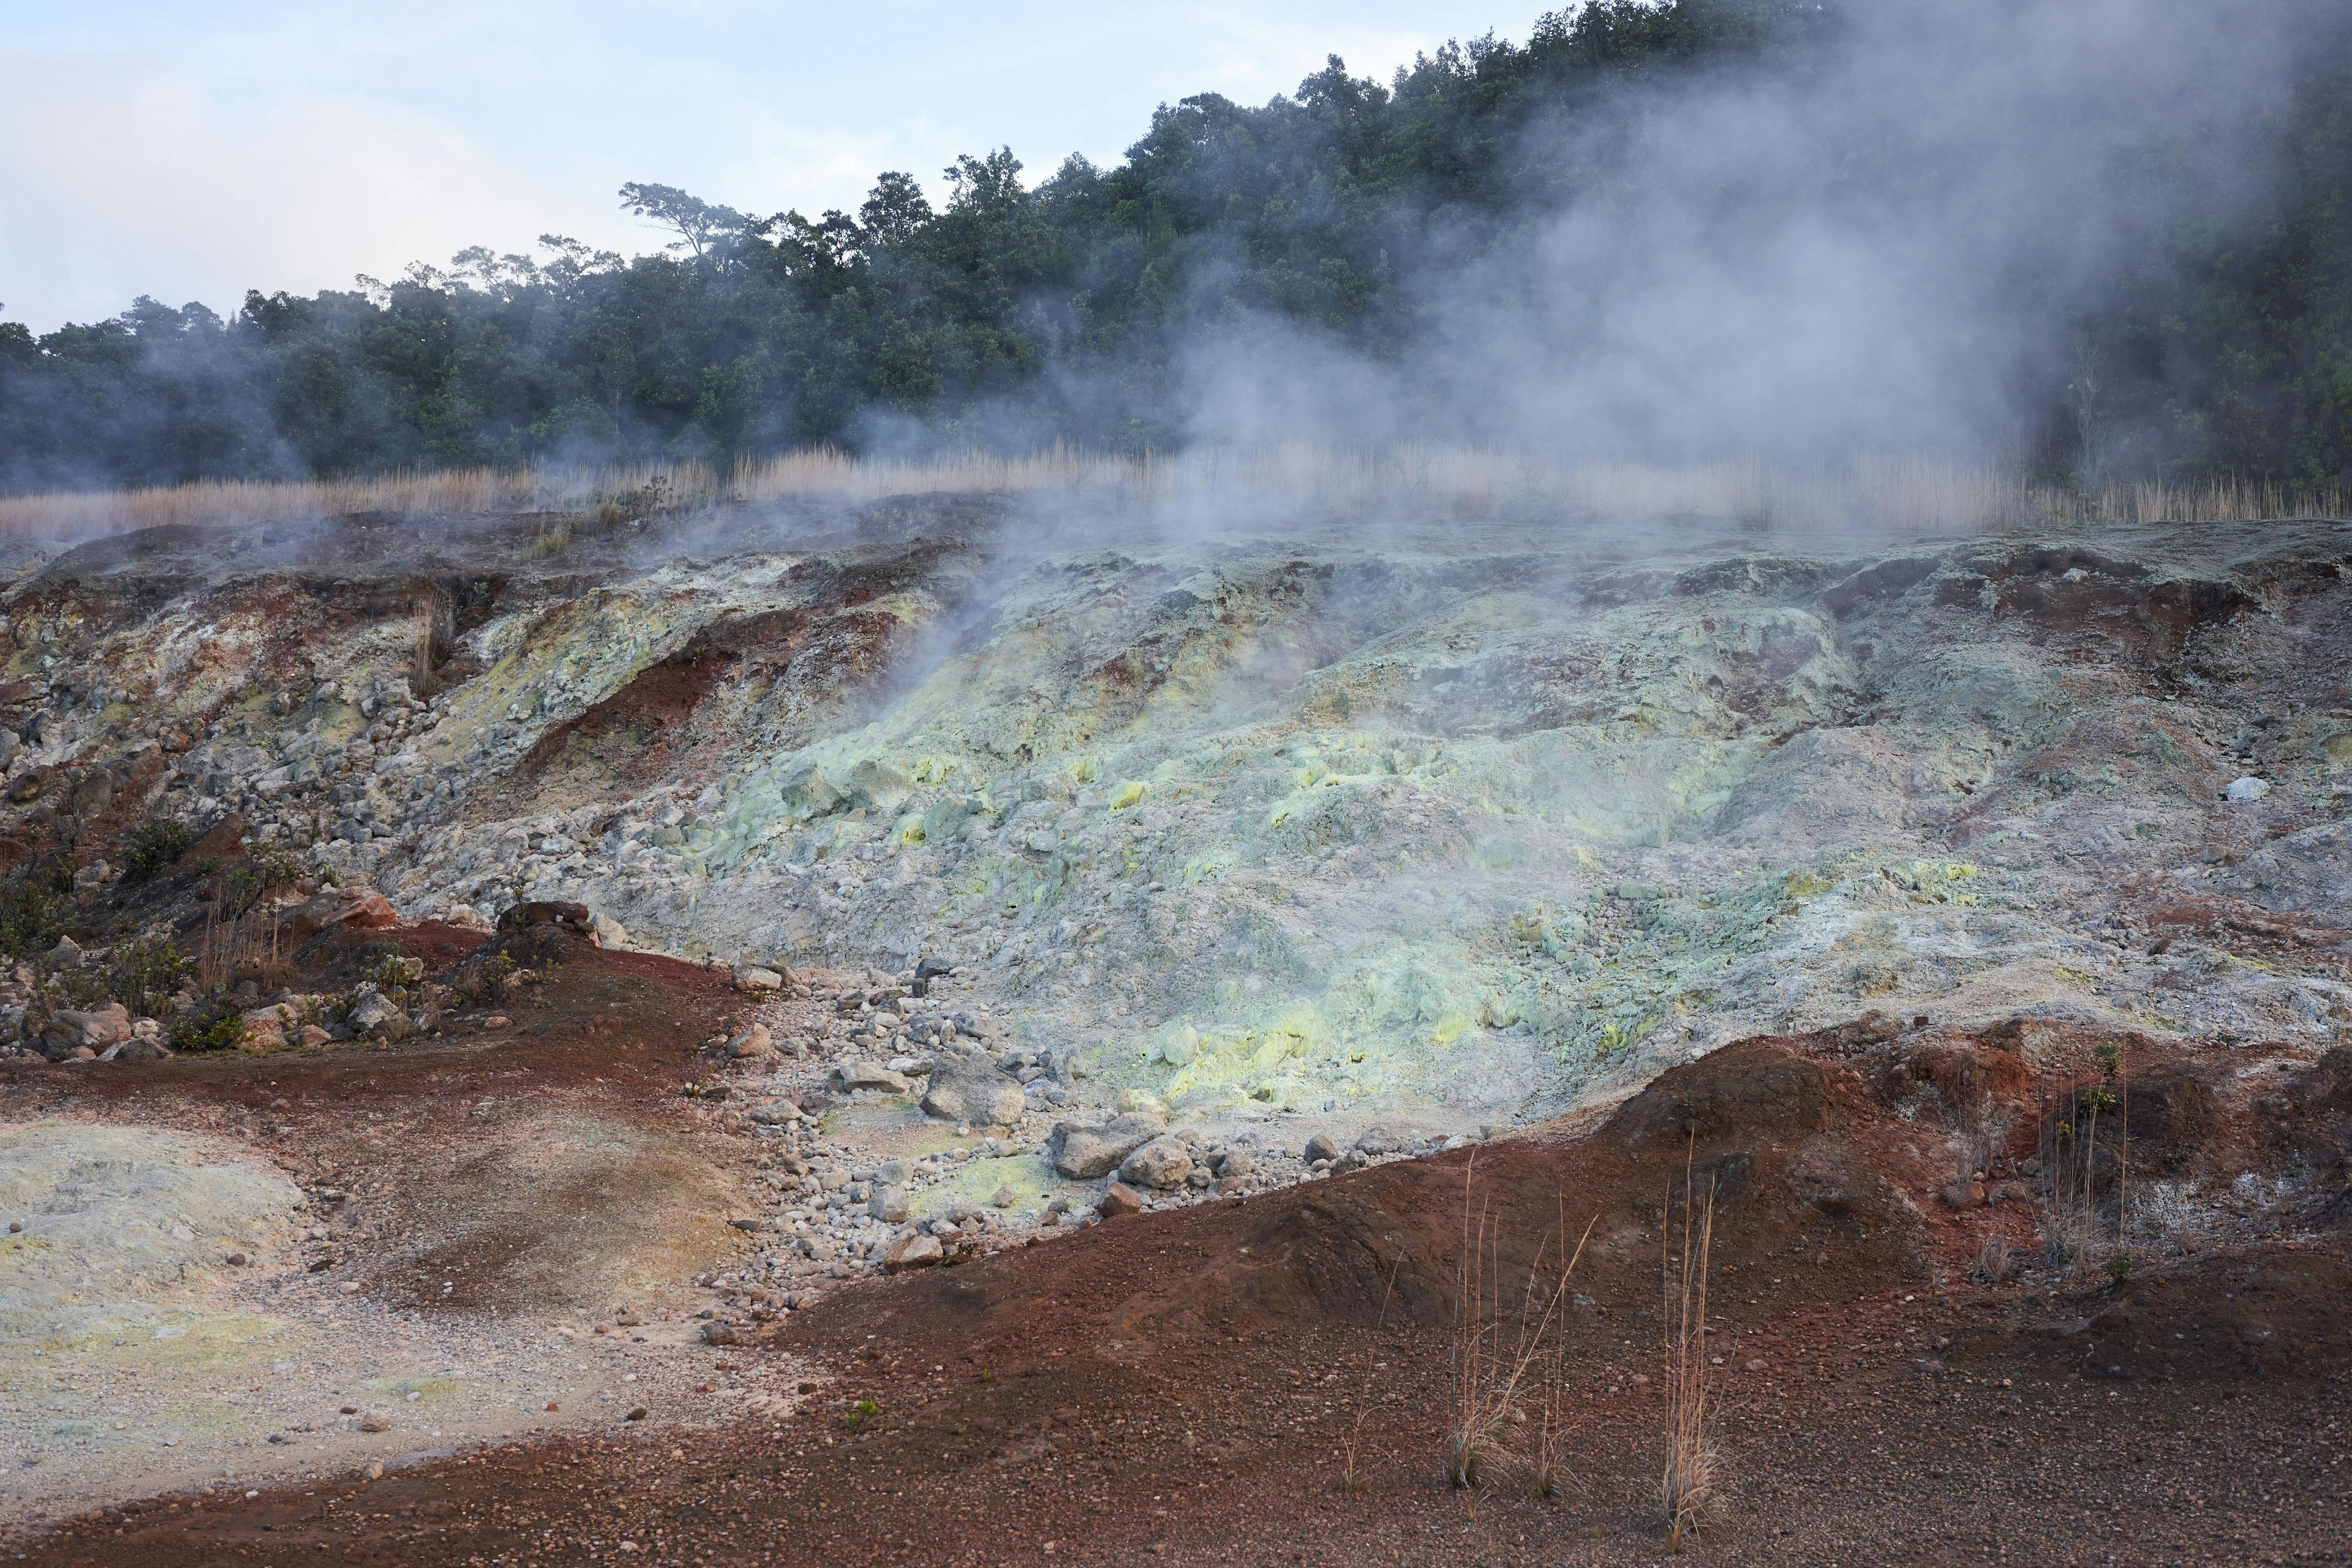 Volcanic gases rich in carbon dioxide, sulfur dioxide and hydrogen sulfide seep out of the ground along with groundwater steam at Sulphur Banks (Ha'akulamanu) in Hawaii Volcanoes National Park. | Image Credit: © Tada Images - stock.adobe.com